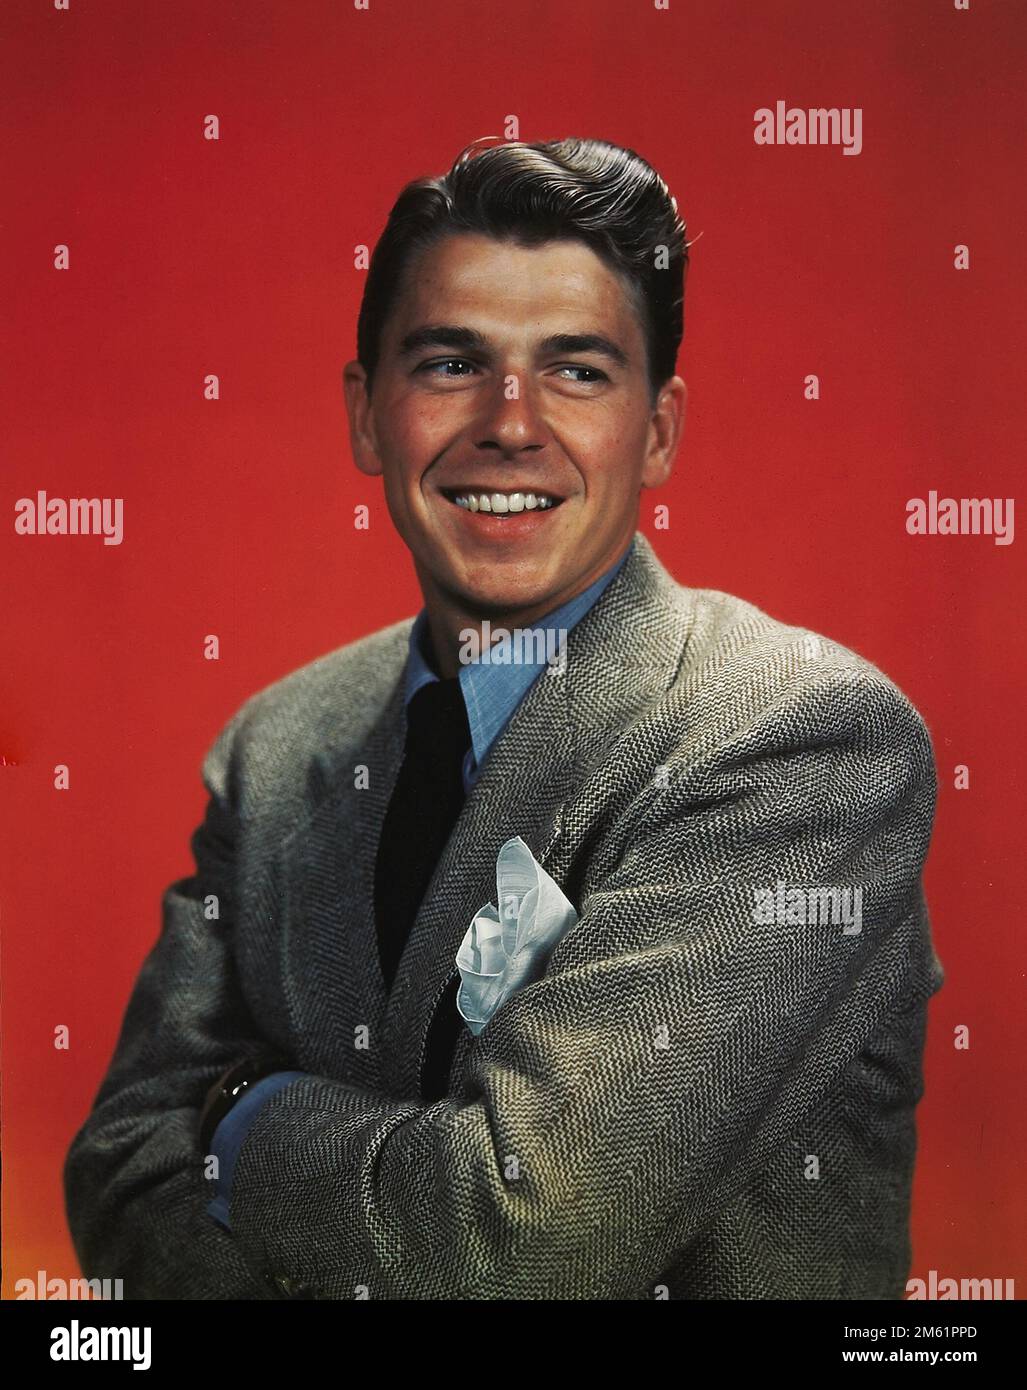 Successful actor and later president of the United States of America, Ronald Reagan, 1940's Stock Photo